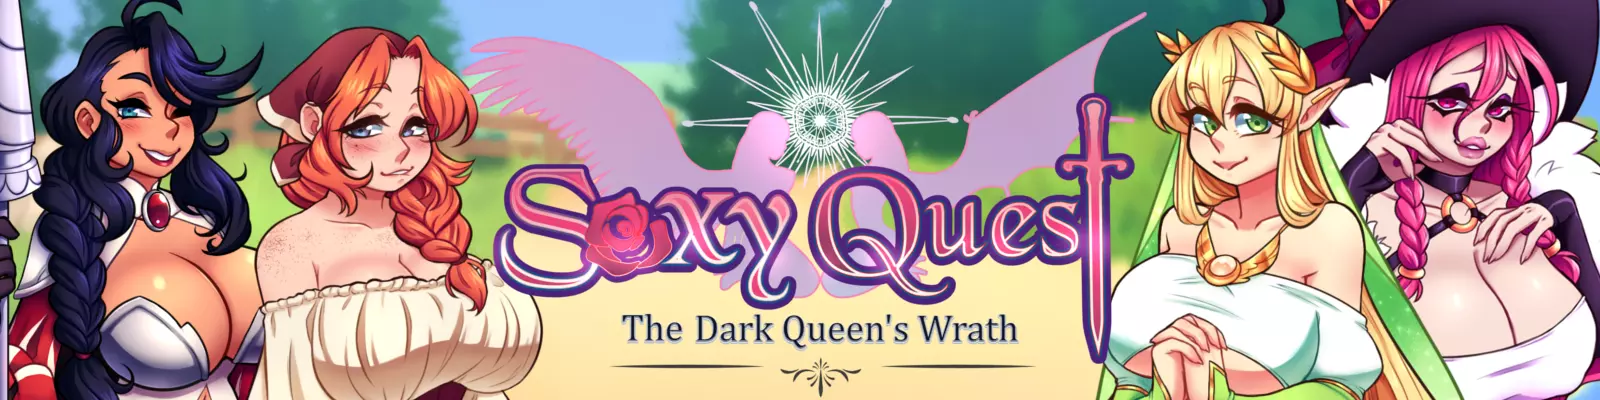 Sexy Quest The Dark Queen's Wrath v1.0.1